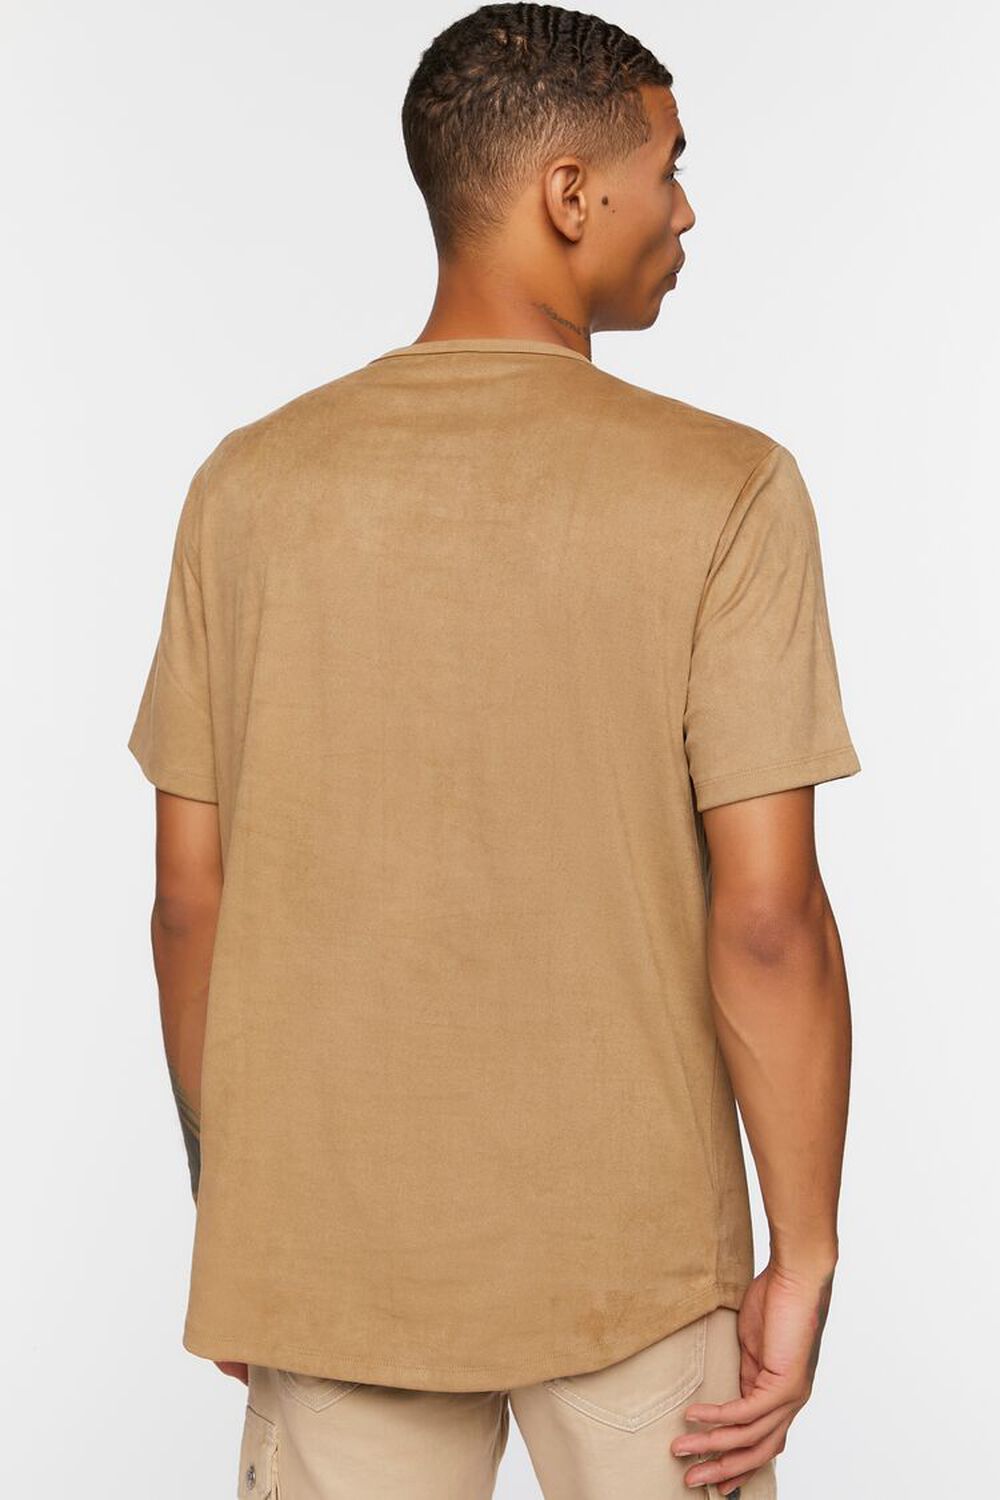 BROWN Faux Suede Curved Tee, image 3